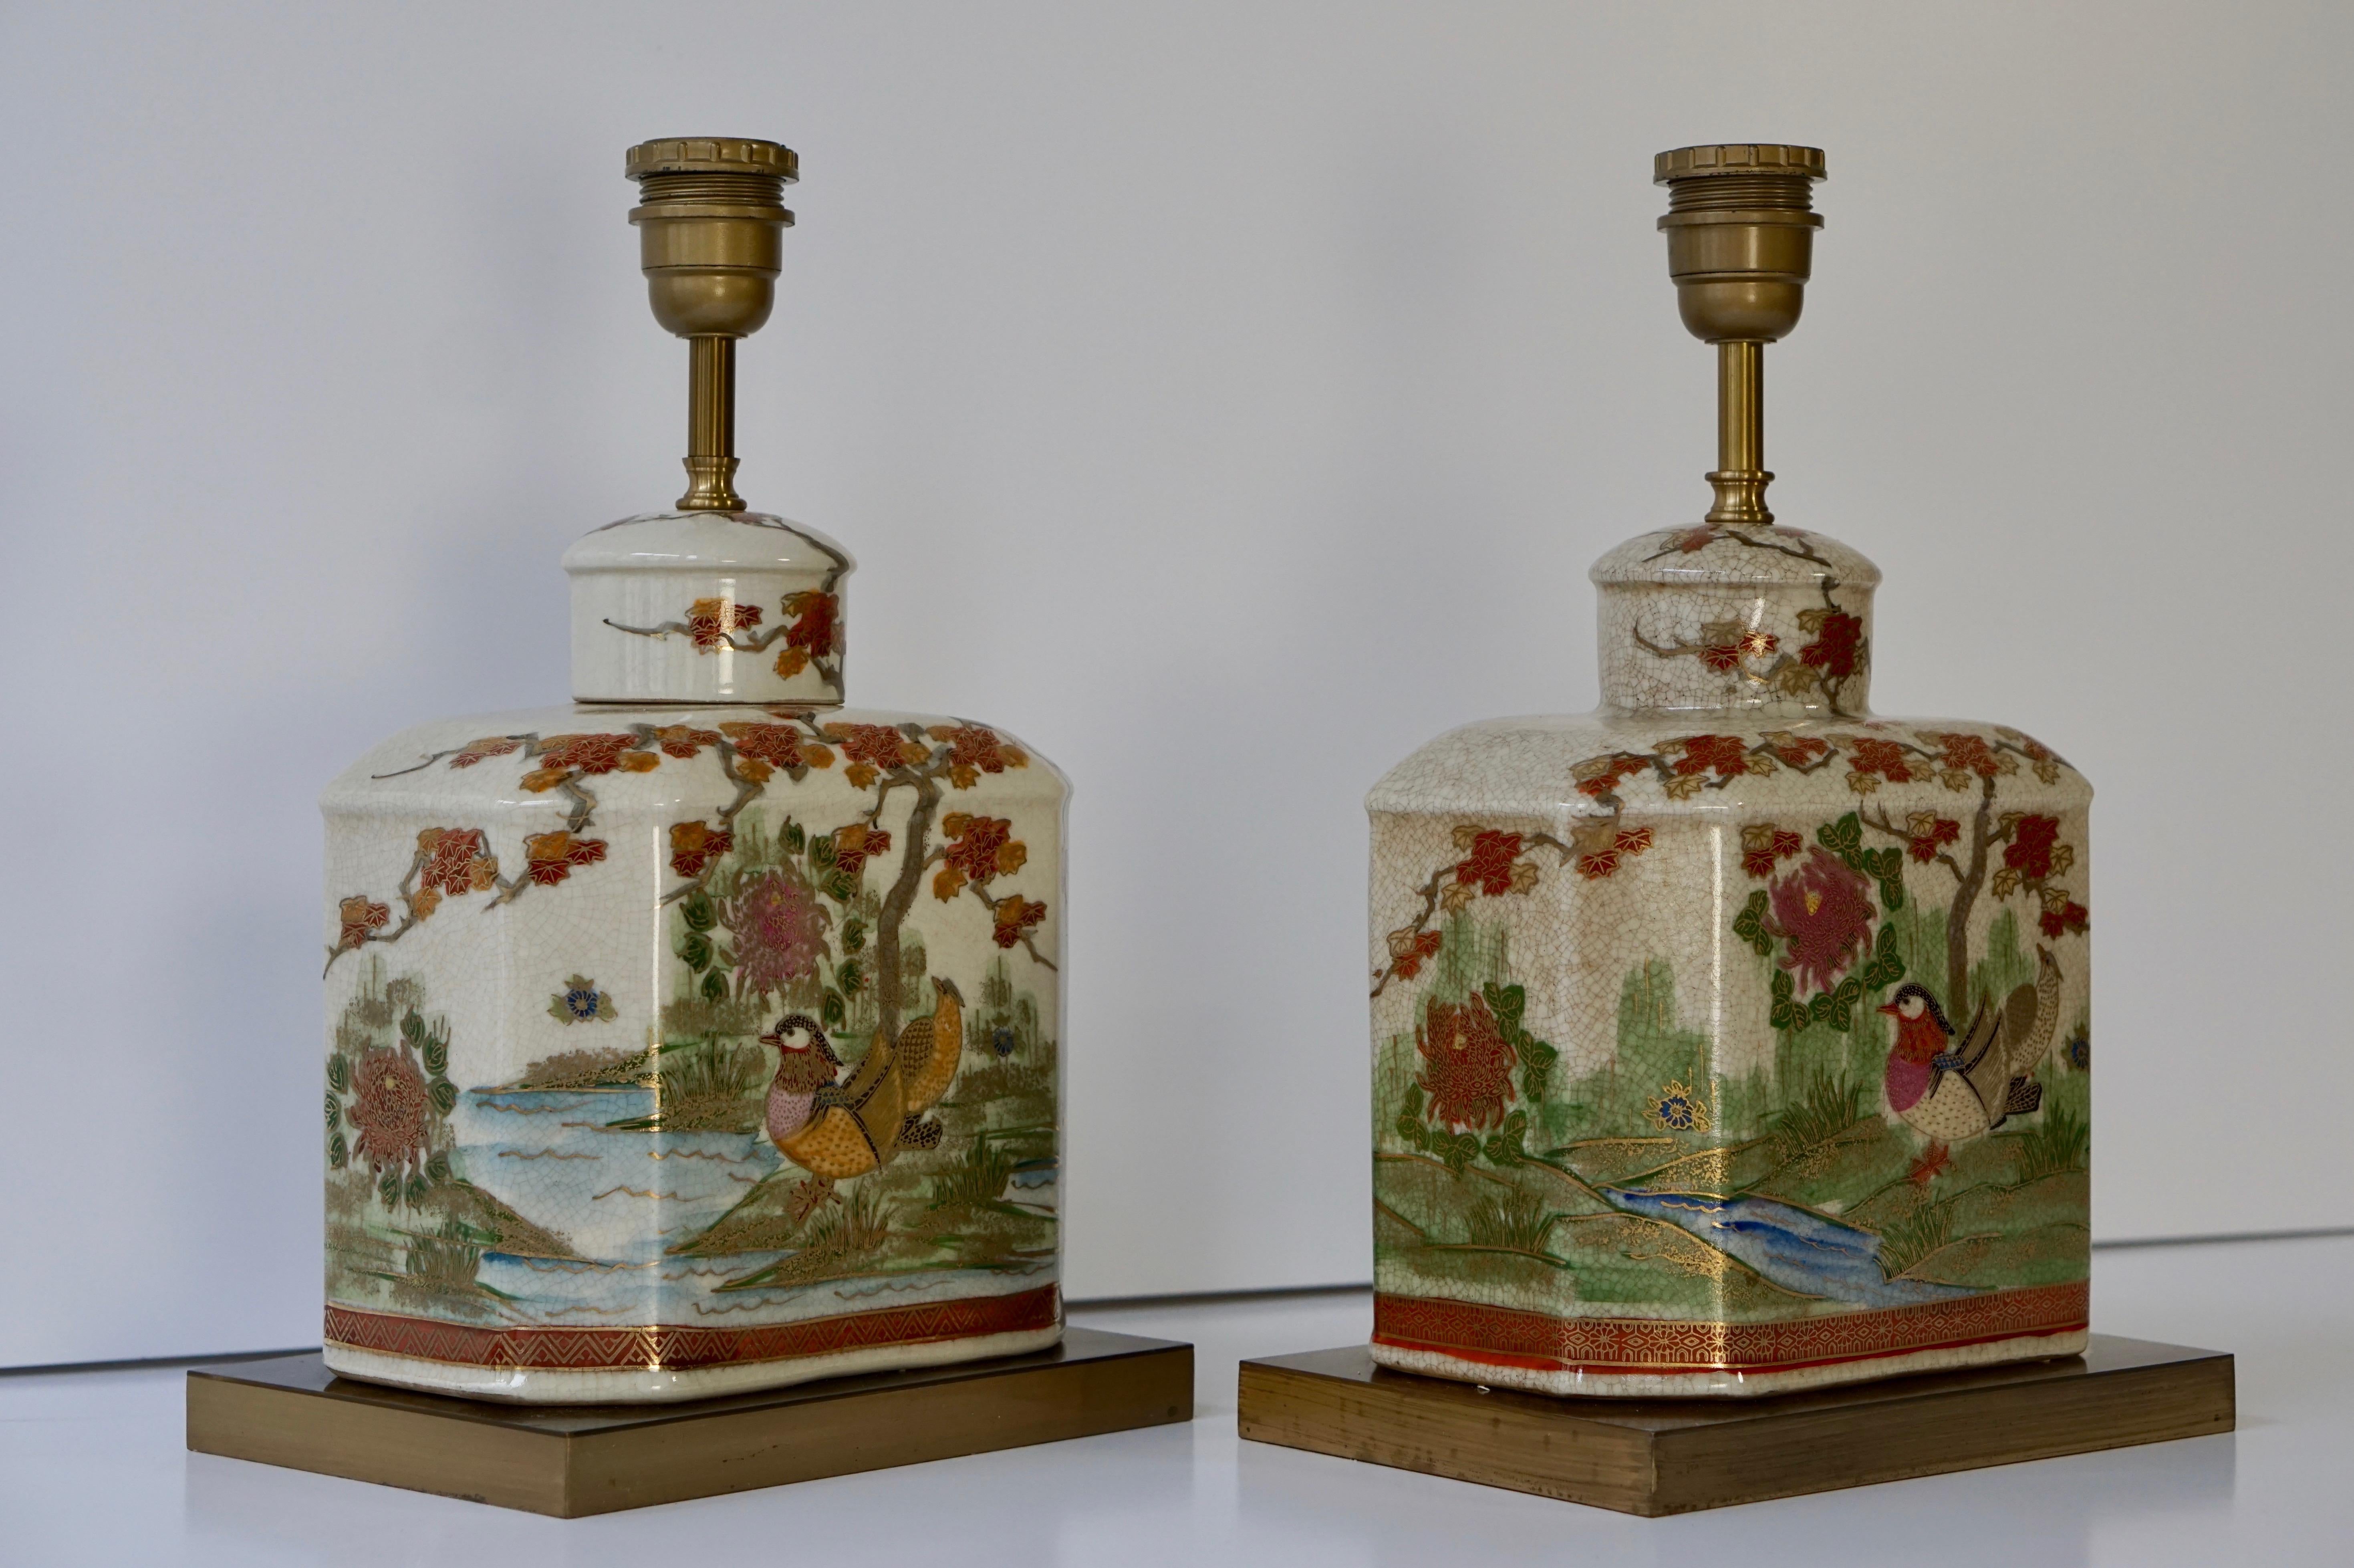 Pair of midcentury Satsuma Japanese lamps with brass base and decorated with birds and flowers.
Japan 1930s.
Measures: Height 53 cm, width 38 cm.
Depth 24 cm.
Width brass base 23 cm,
depth 16 cm.
One E27 bulb.